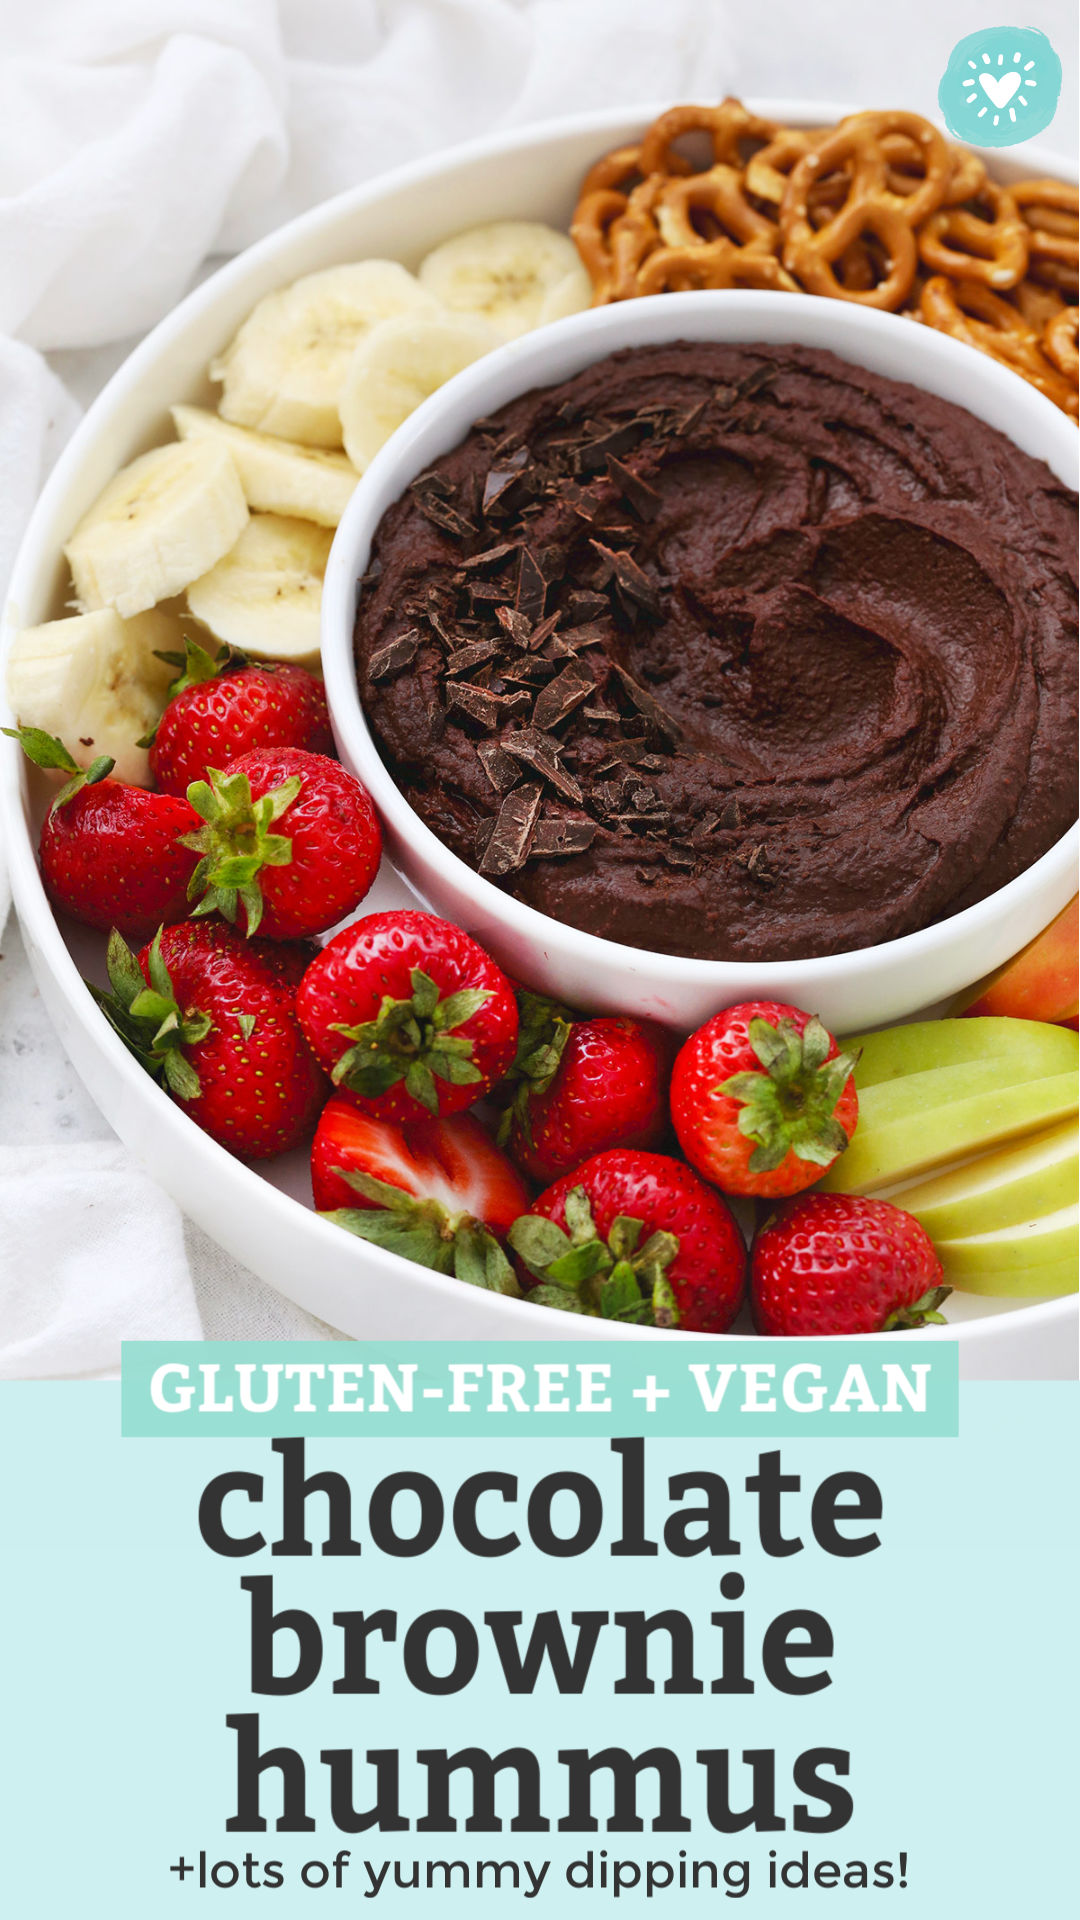 Front view of a bowl of chocolate brownie hummus on a fruit plate with text overlay that reads "Gluten-Free + Vegan Chocolate Brownie Hummus +lots of yummy dipping ideas"